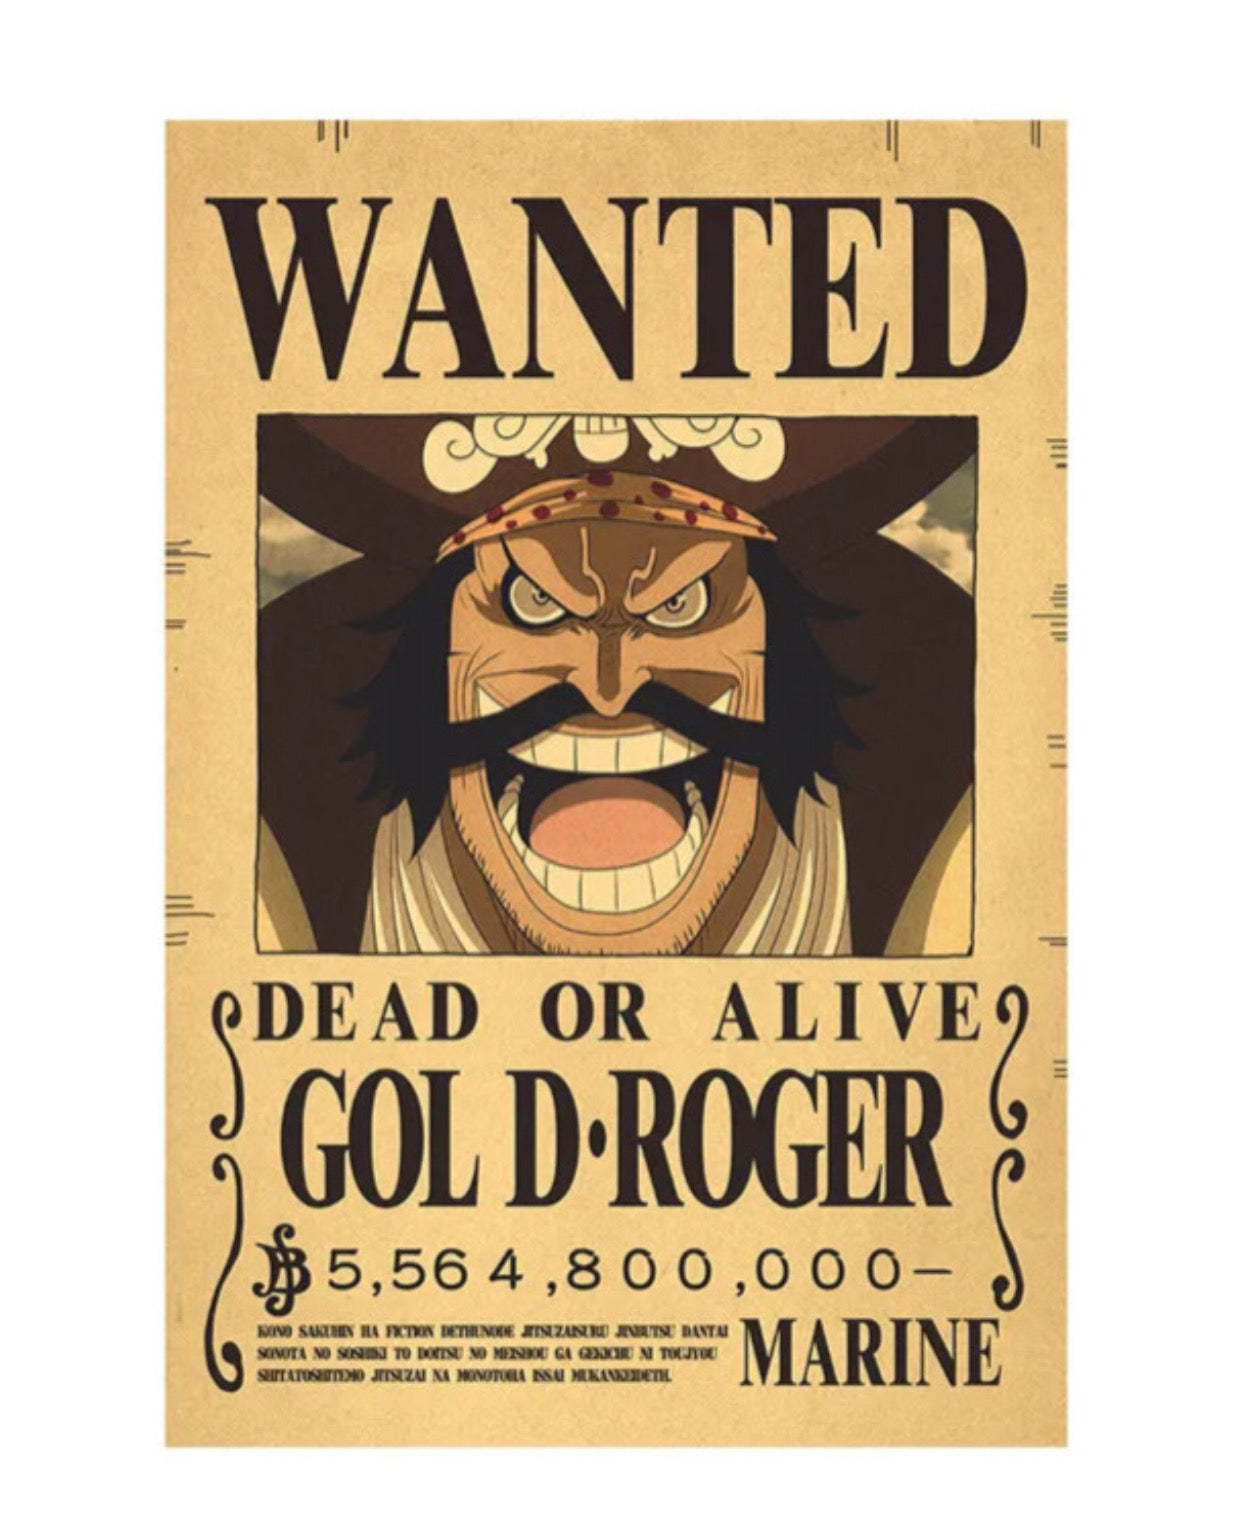 wanted gold-roger poster